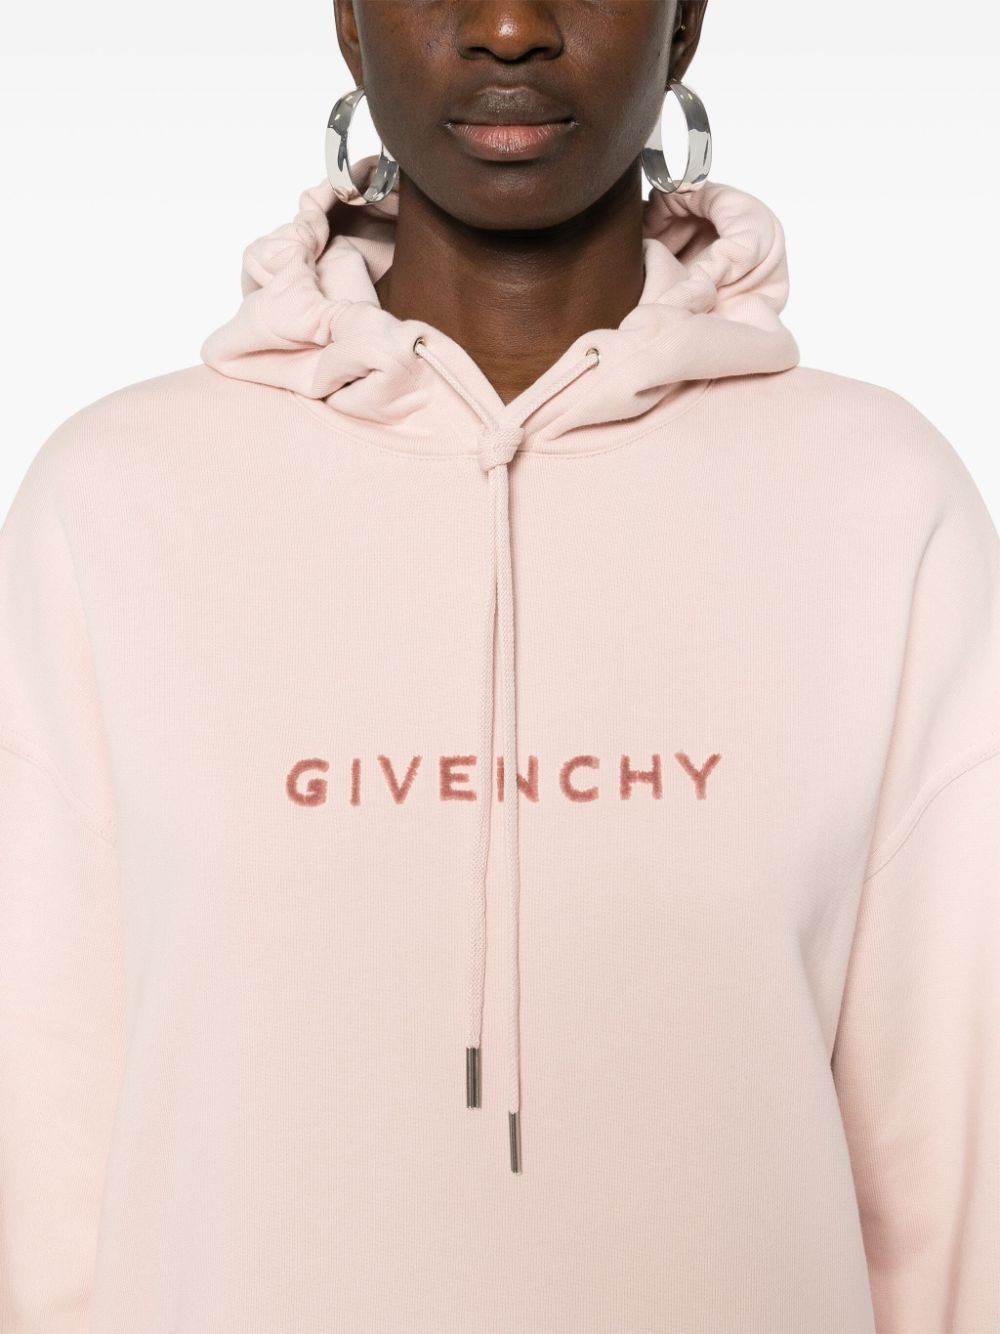 GIVENCHY Soft Blush Pink Hoodie - Casual and Stylish for Women